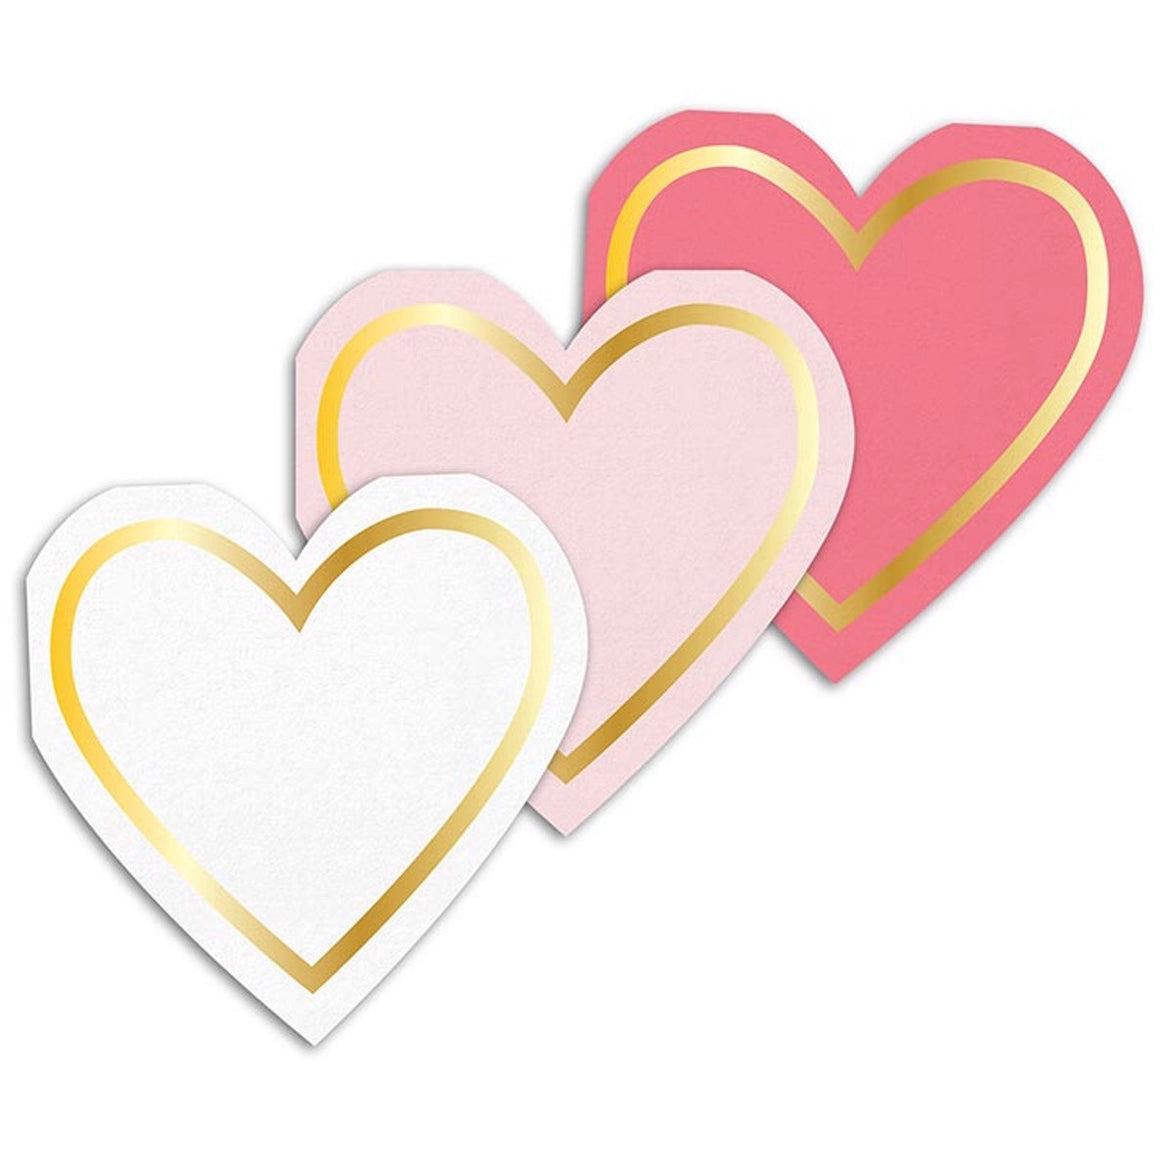 NAPKINS SMALL - VALENTINES HEART TRIO WITH GOLD (Pack of 24)